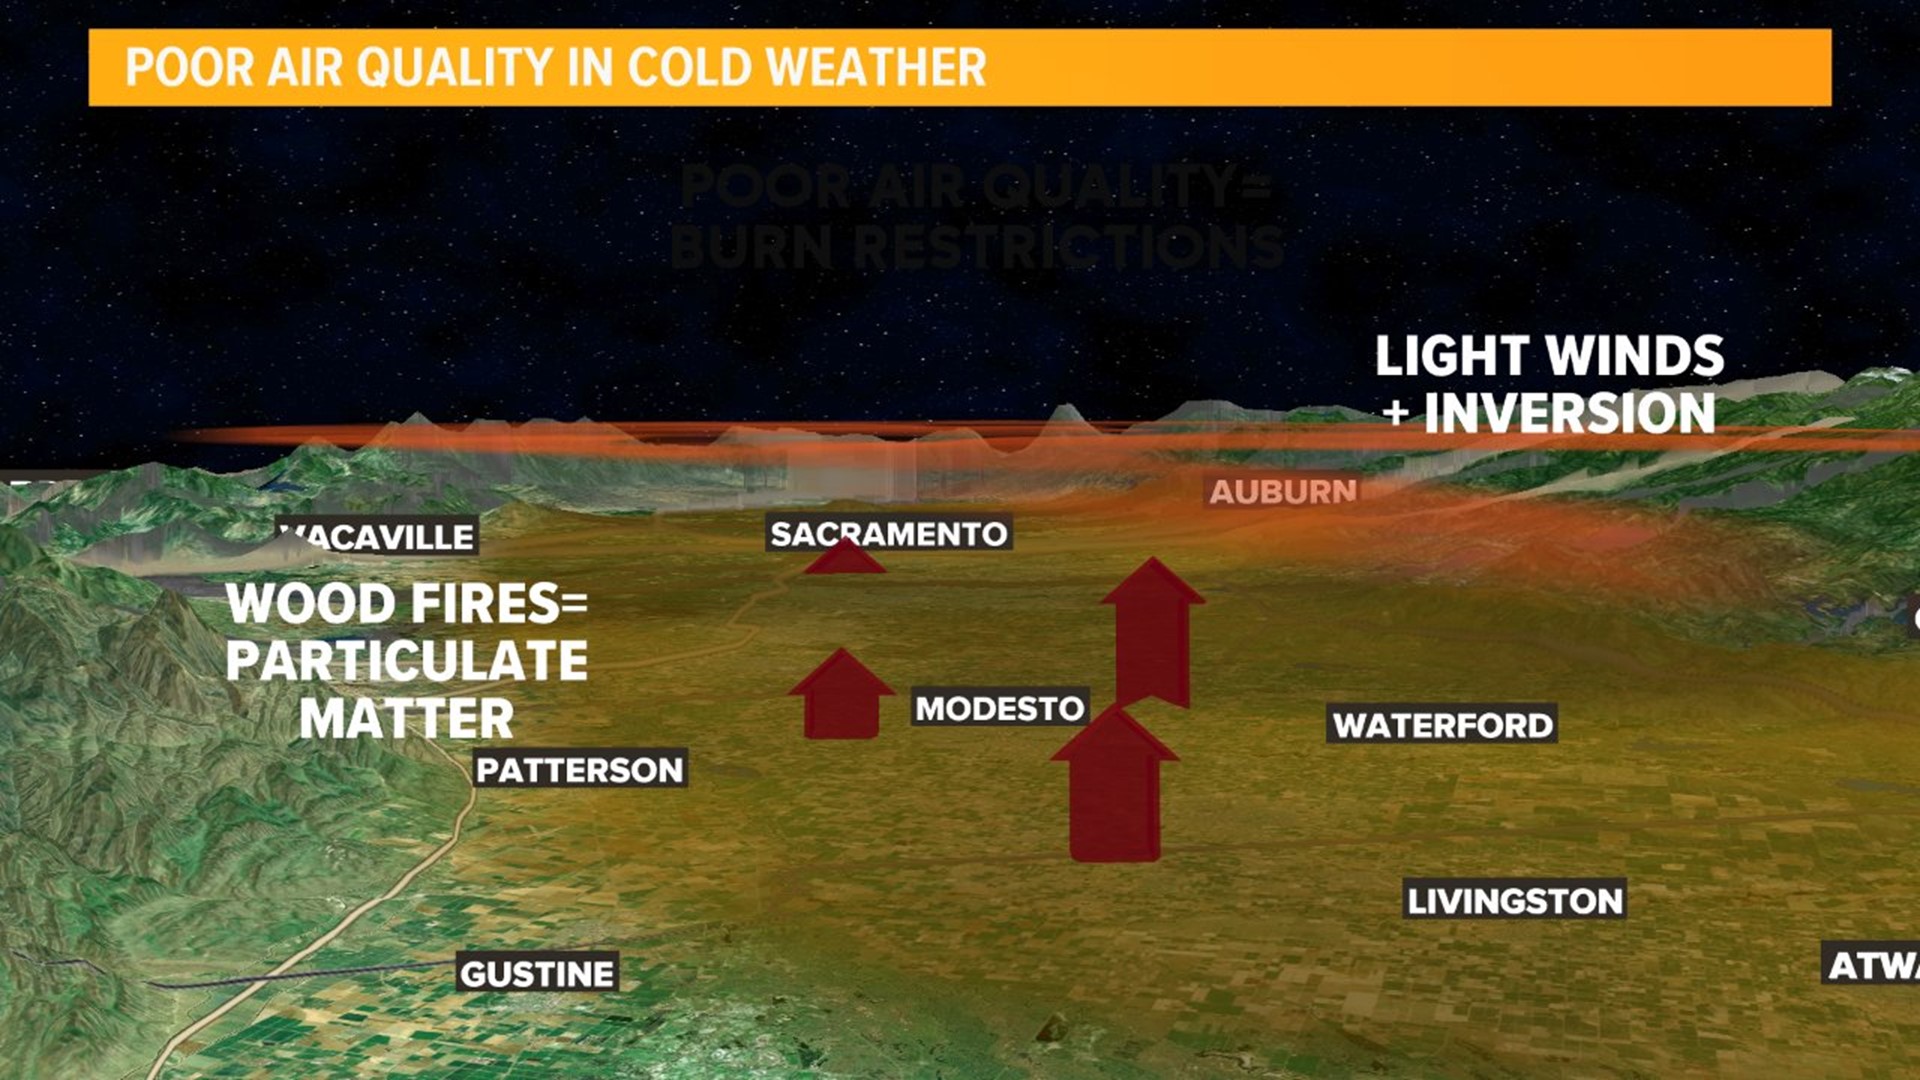 Quiet weather patterns during the winter months can prompt burn bans and similar warnings from various county air quality agencies throughout Northern California.